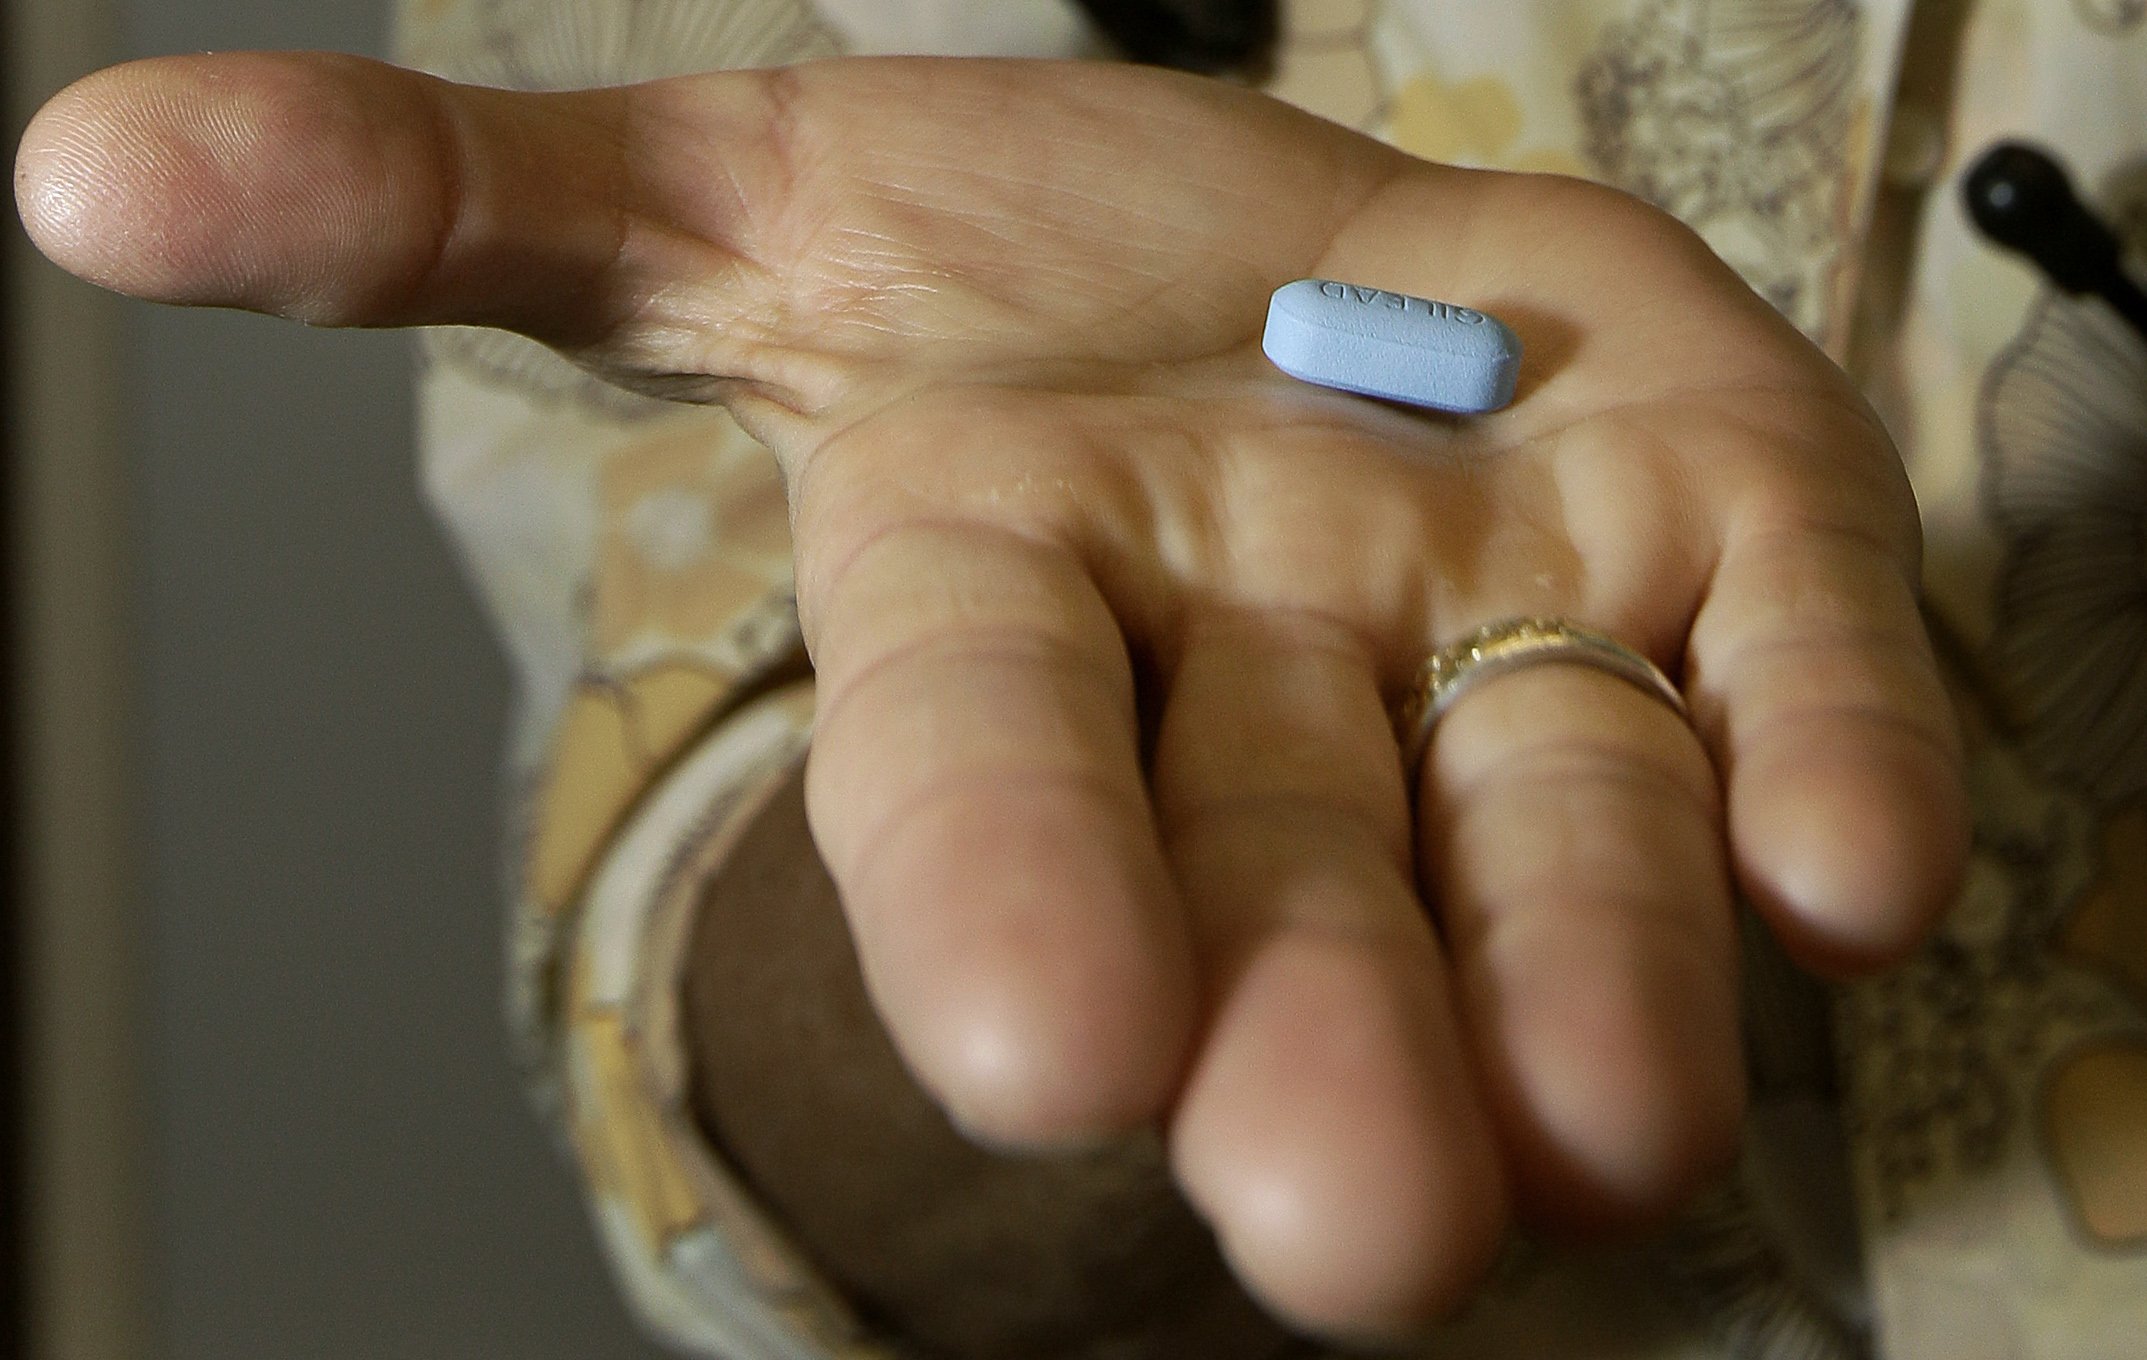 There's an almost-perfect HIV prevention pill, but not enough people are using it